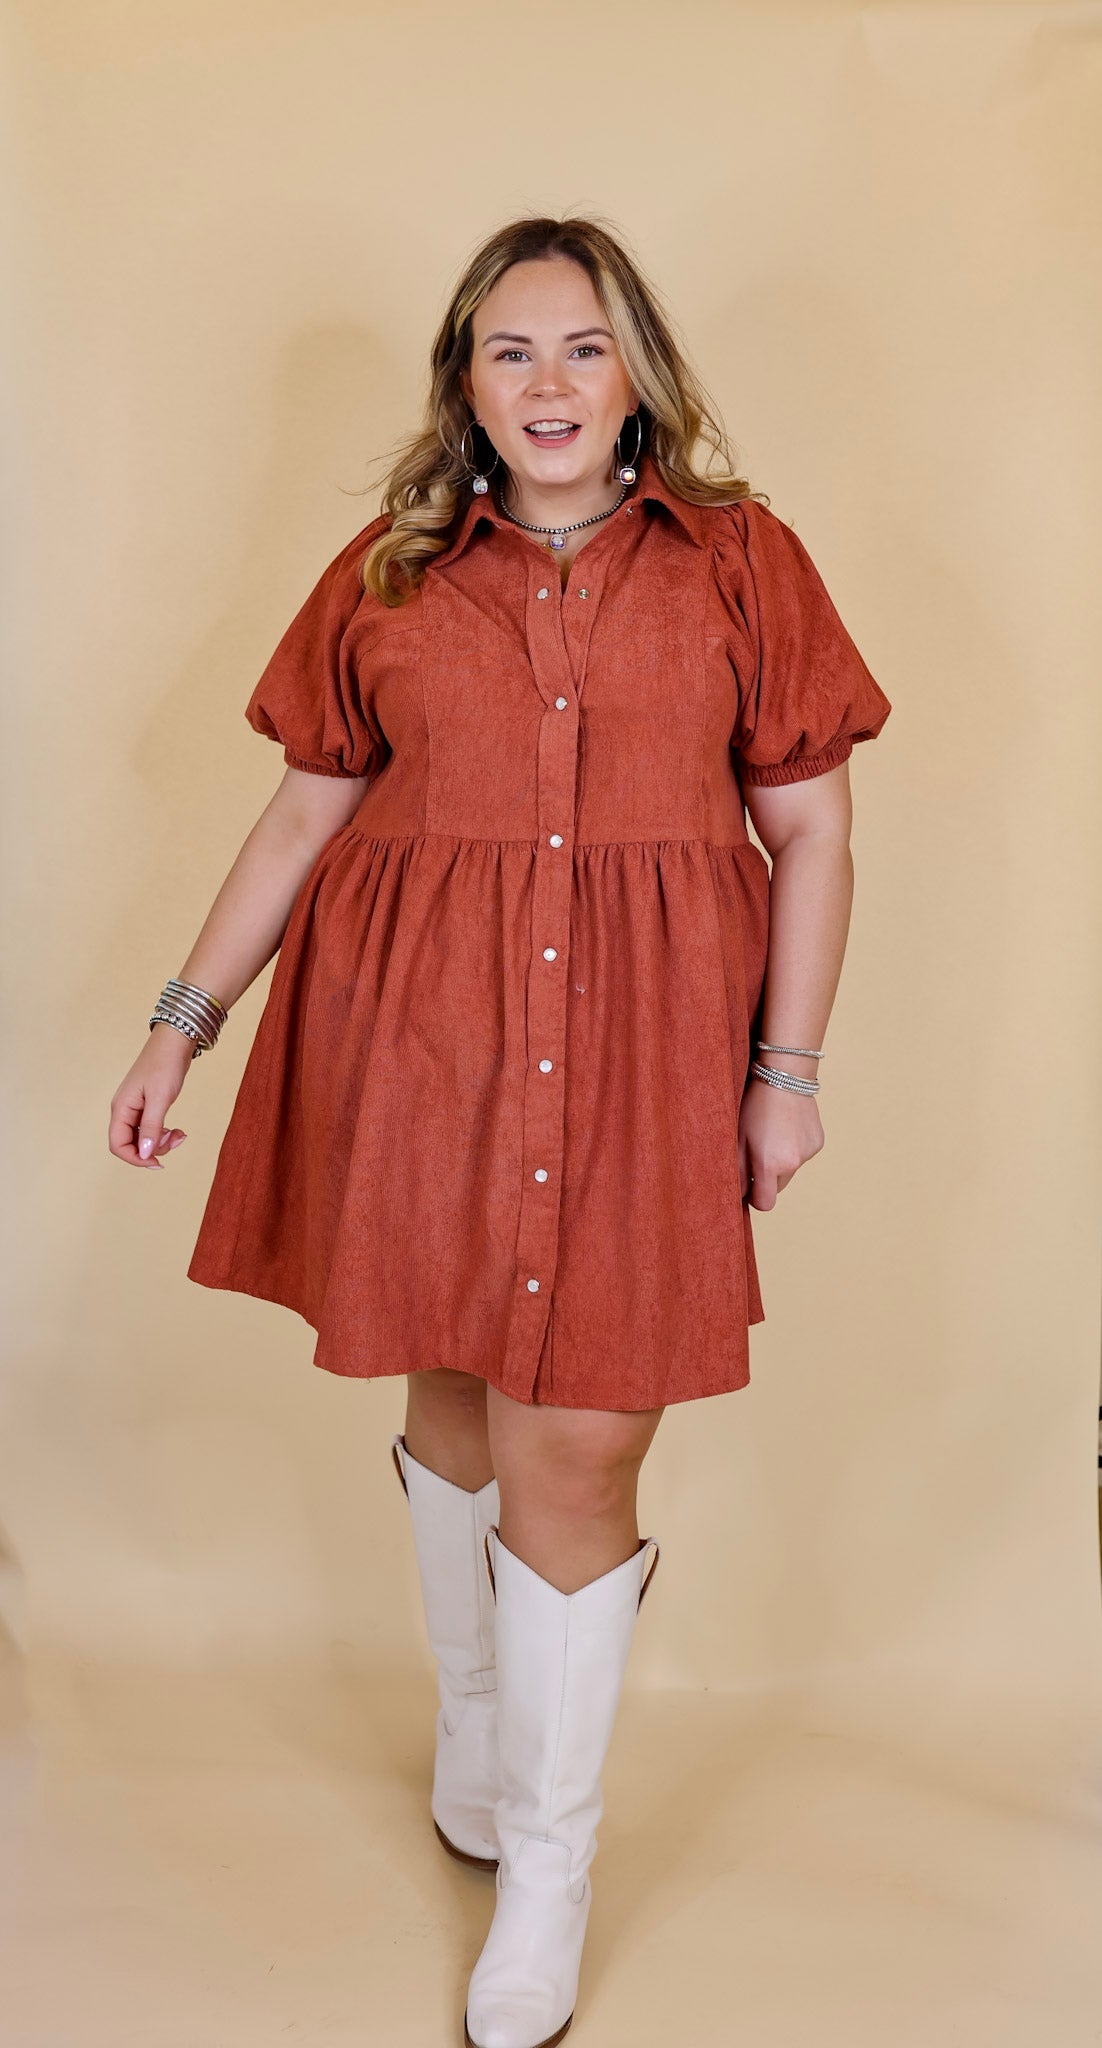 Adventures Ahead Button Up Corduroy Babydoll Dress in Terracotta